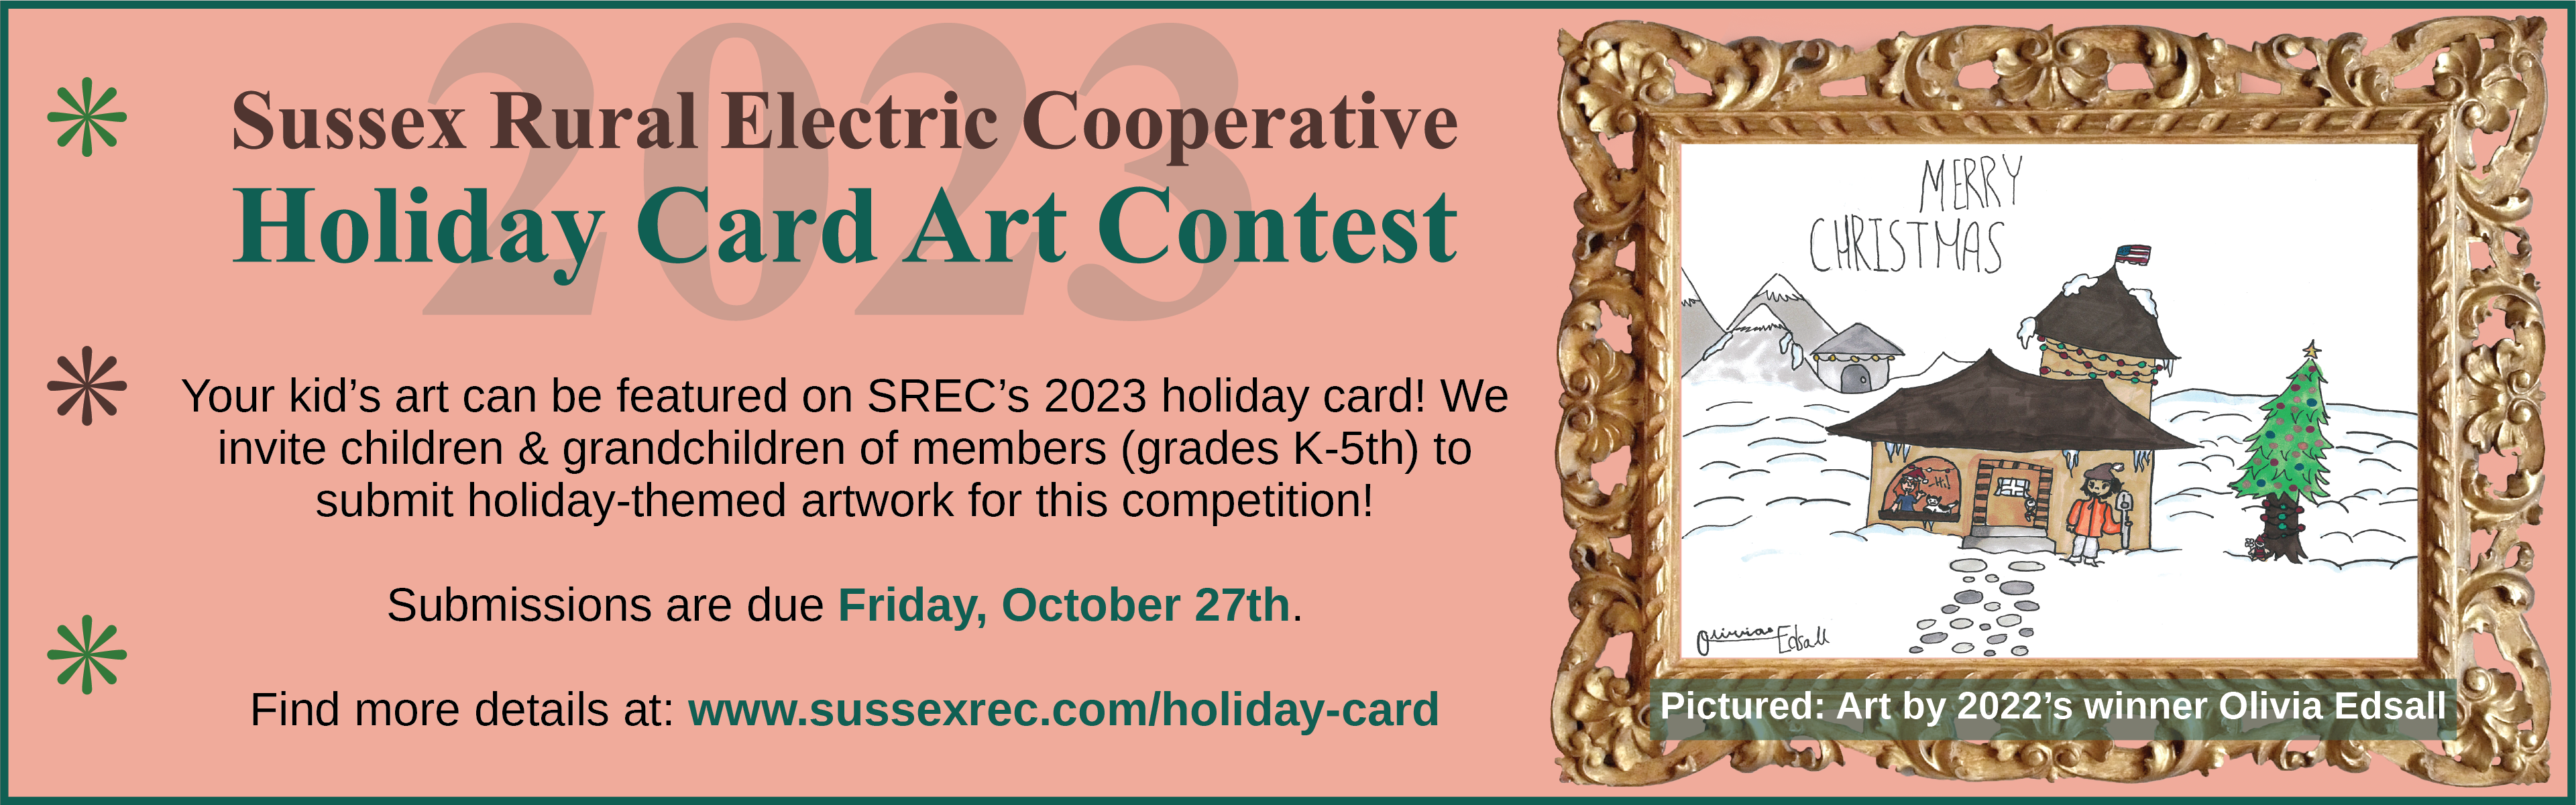 2023 Sussex Rural Electric Cooperative Holiday Card Art Contest. Your kid's art can be featured on SREC's 2023 holiday card! We invite children and grandchildren of members (grades K-5th) to submit holiday-themed artwork for this competition! Submissions are due Friday, October 27th. Find more details at: www.sussexrec.com/holiday-card